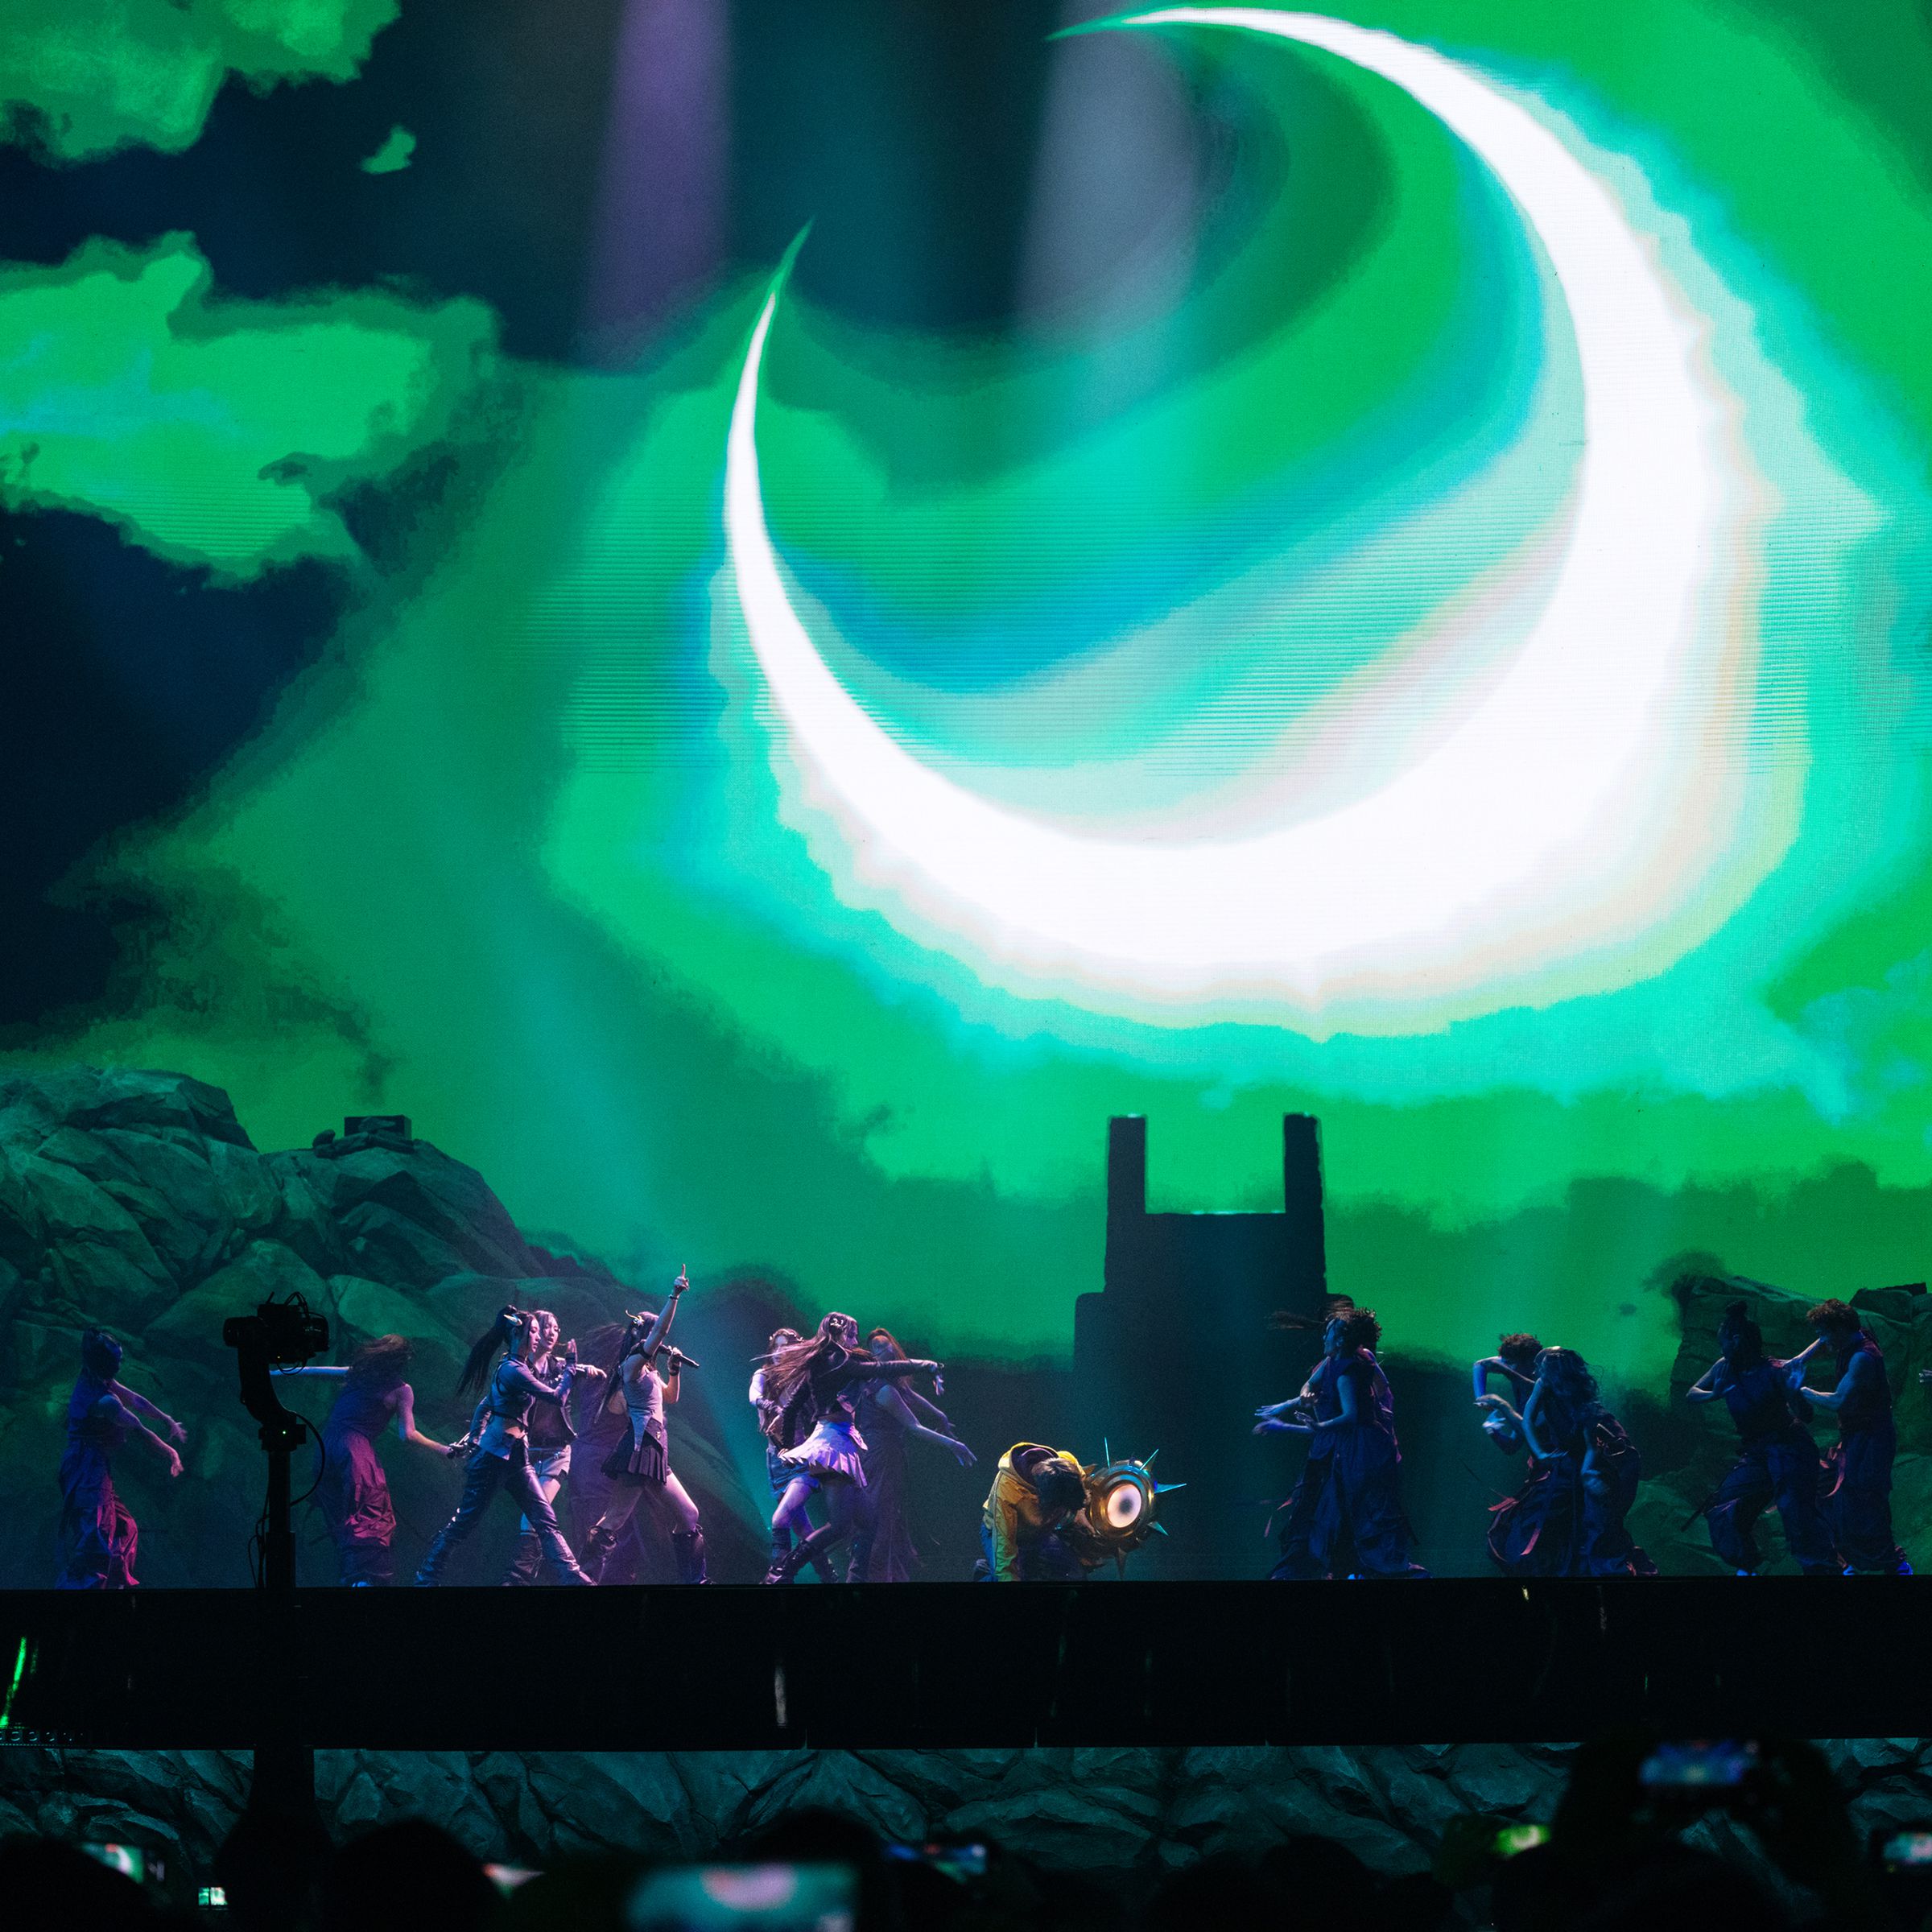 A photo of NewJeans performing at the 2023 League of Legends World Championship in Seoul.